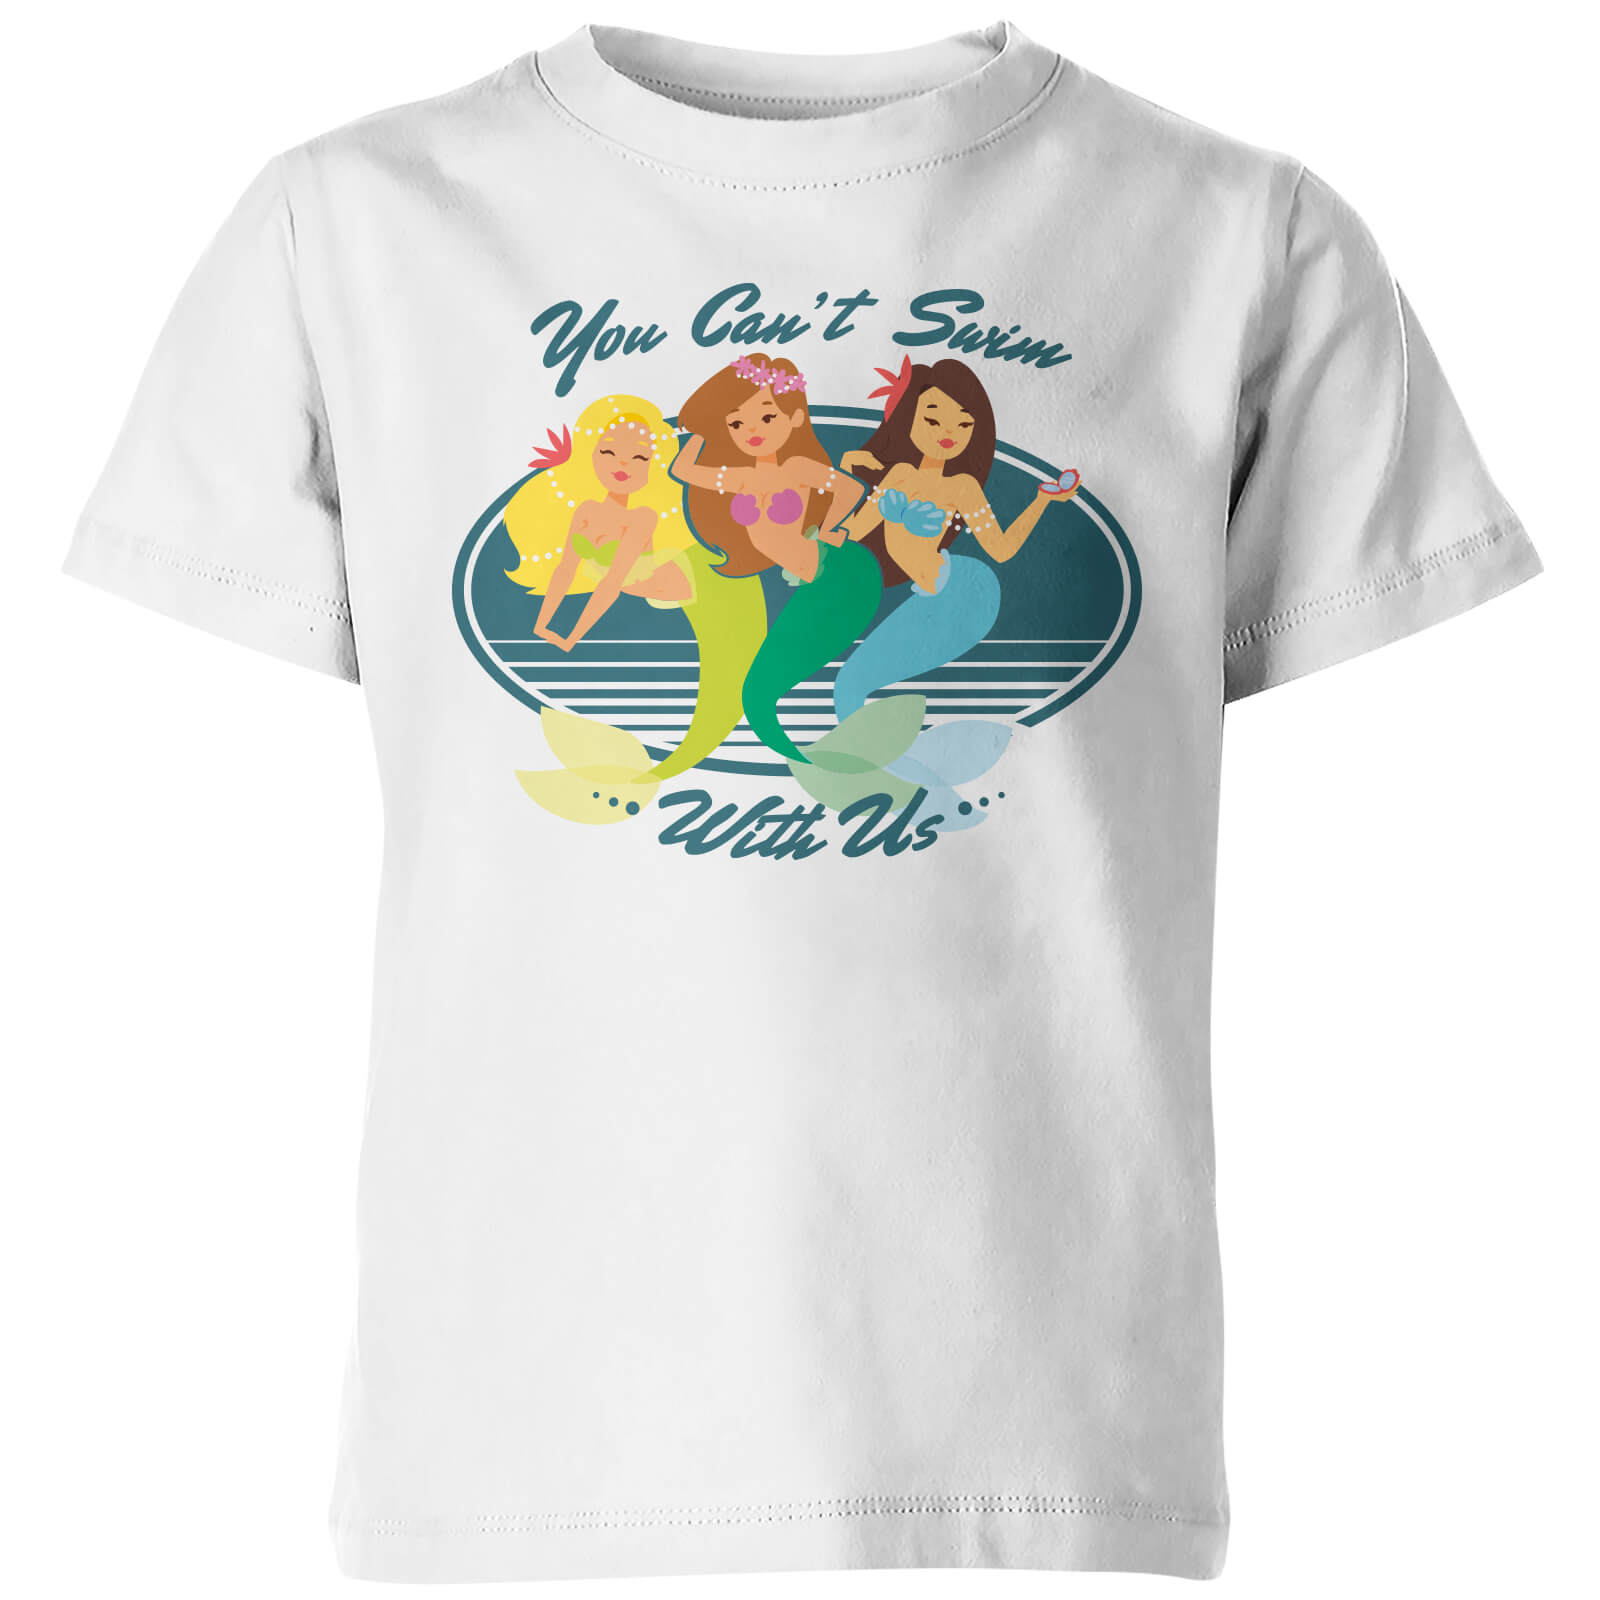 You Can't Swim With Us Kids' White T-Shirt - 3-4yrs - White